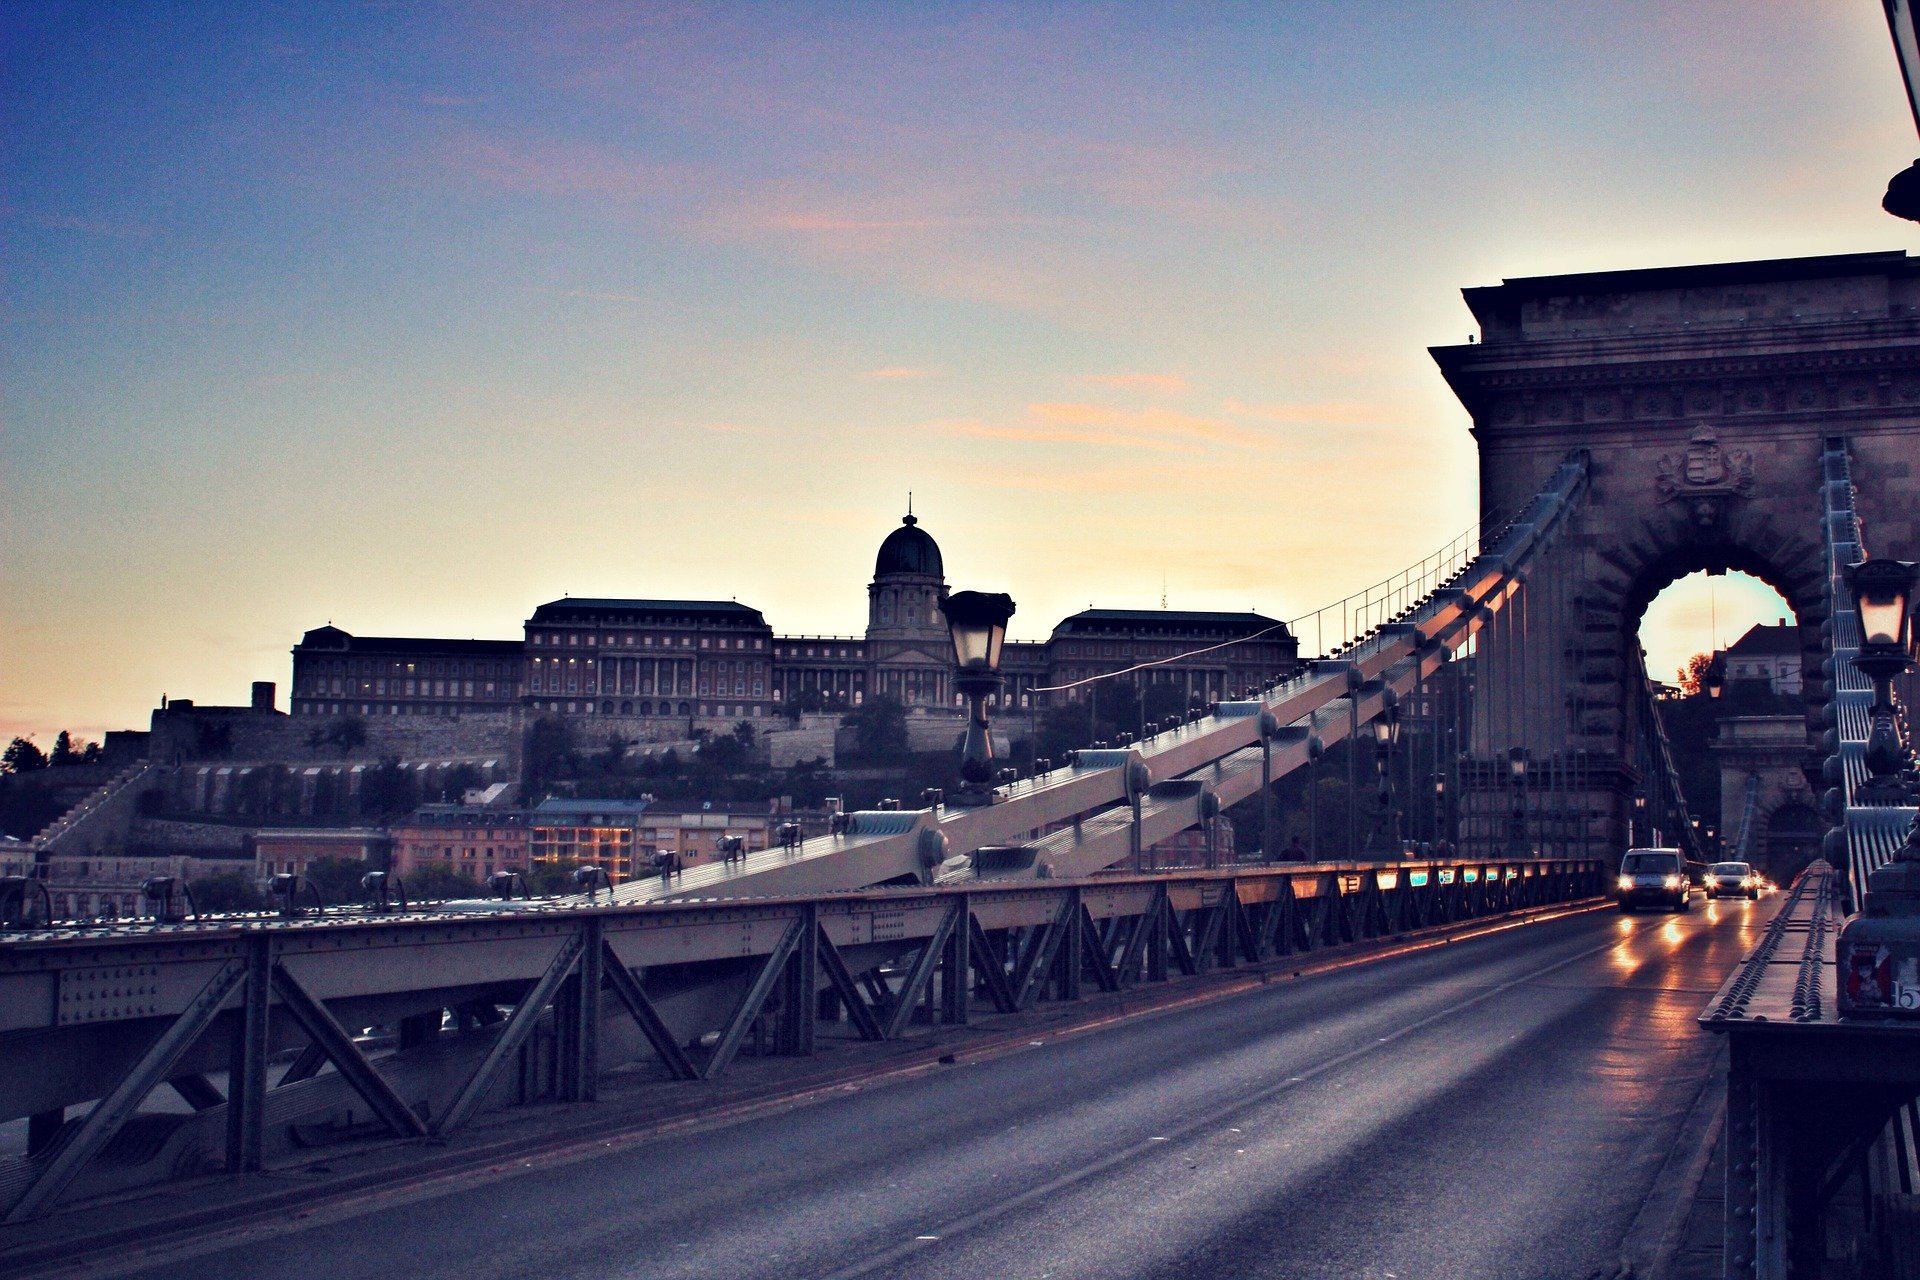 Budapest to renovate Chain Bridge, castle tunnel - Daily News Hungary